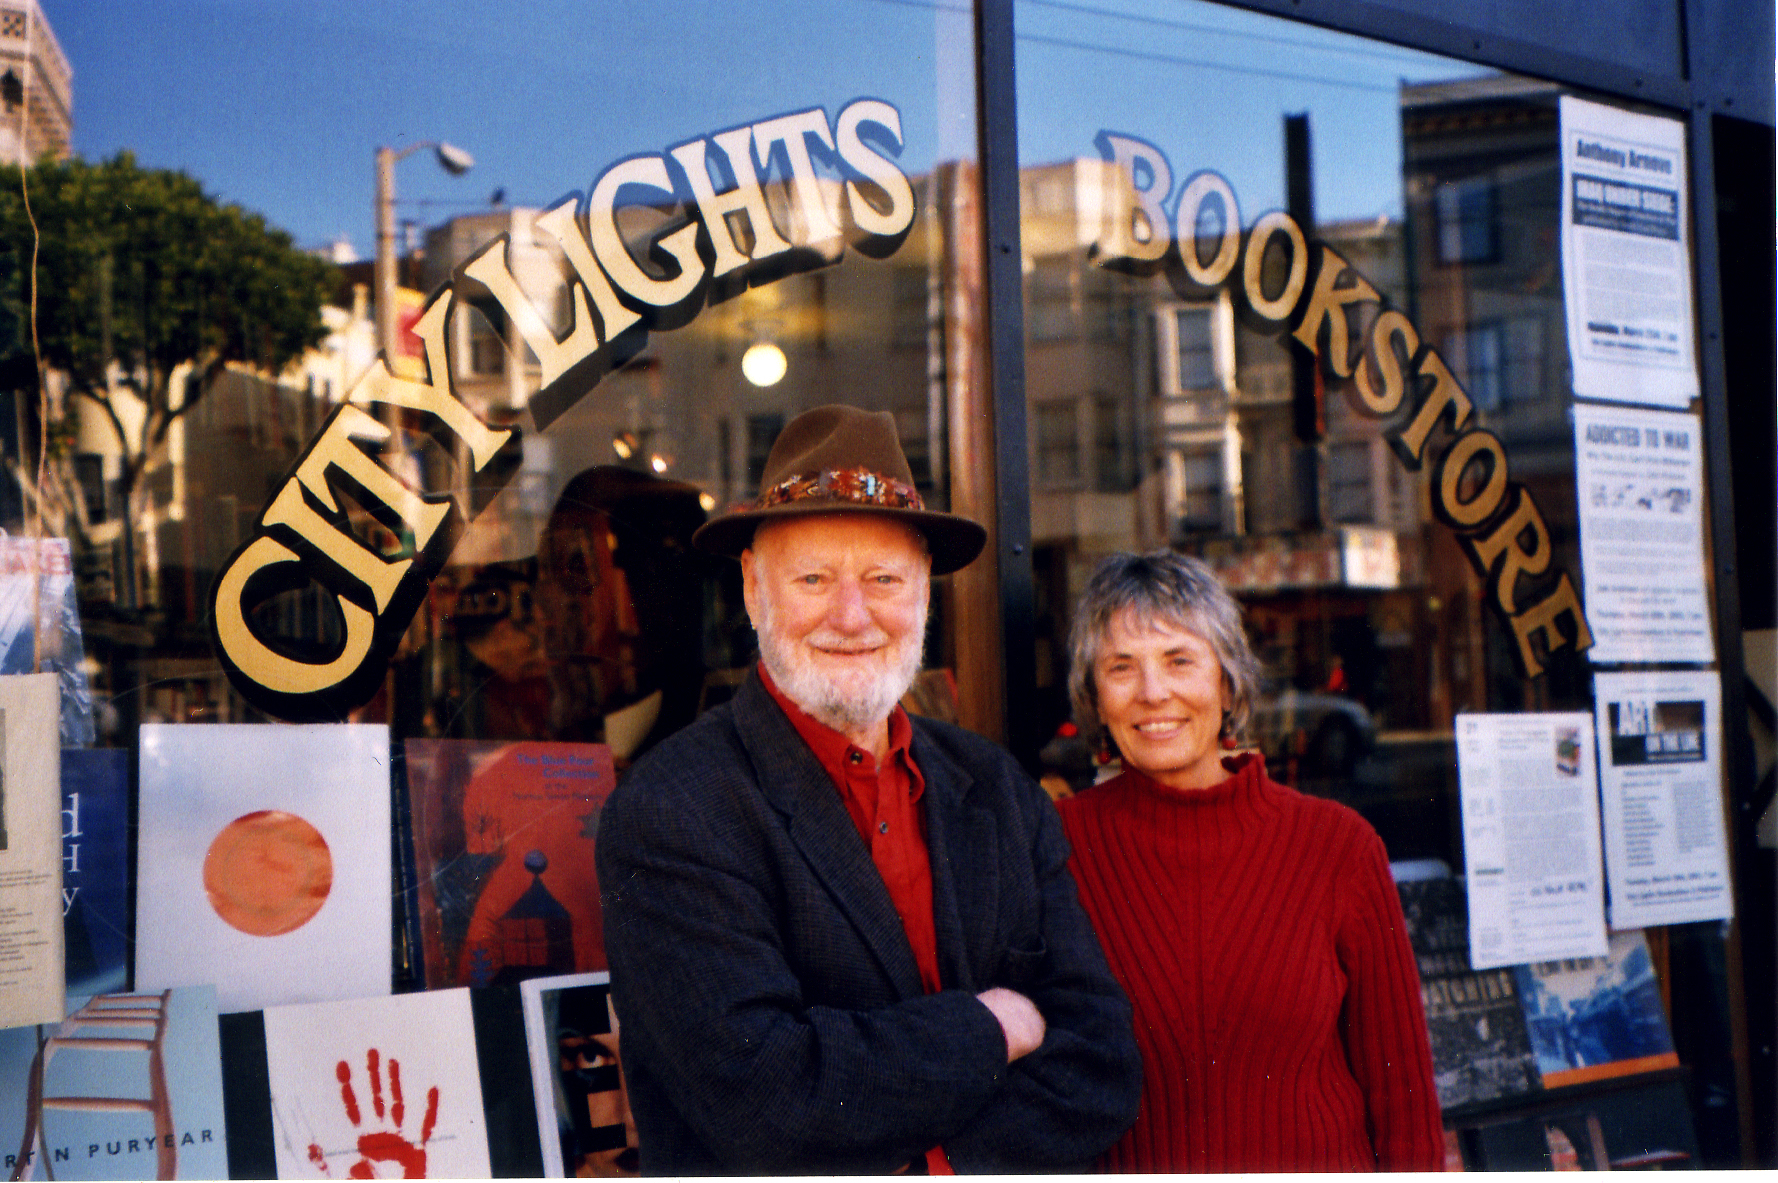 Lawrence Ferlinghetti and Nancy Peters posing together outside the store in 2001